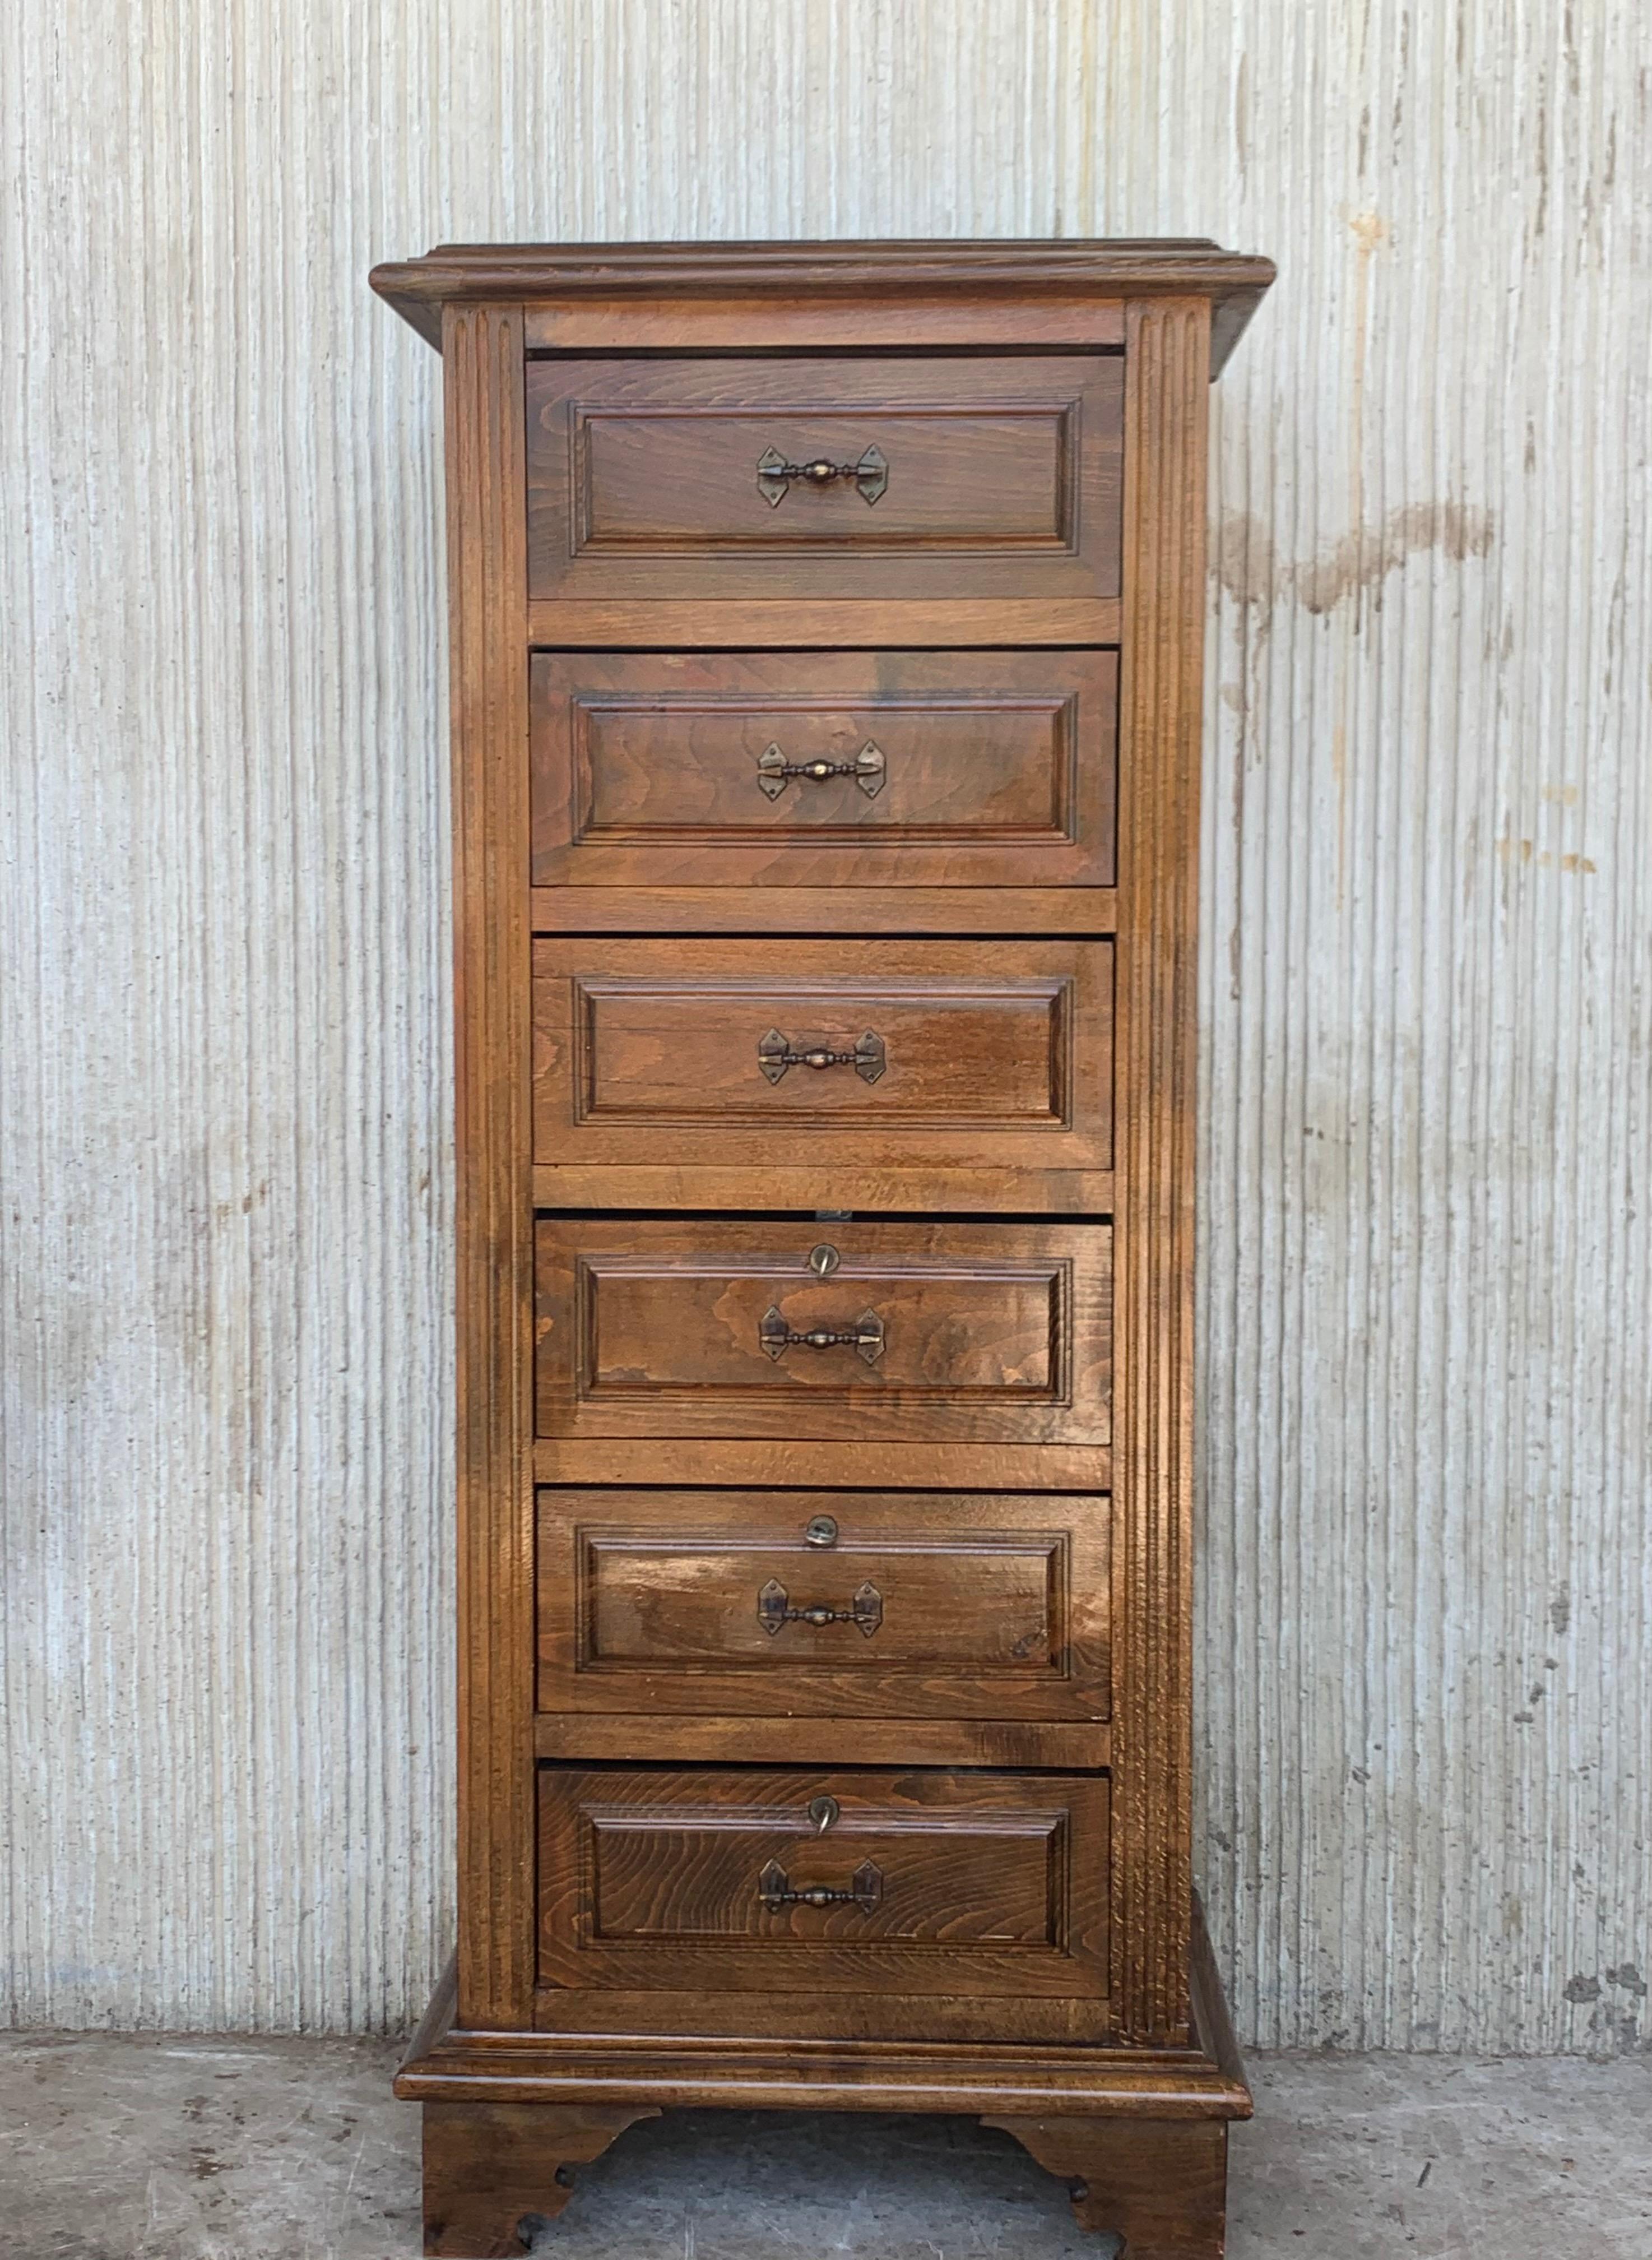 From Northern Spain, constructed of solid pine, called 